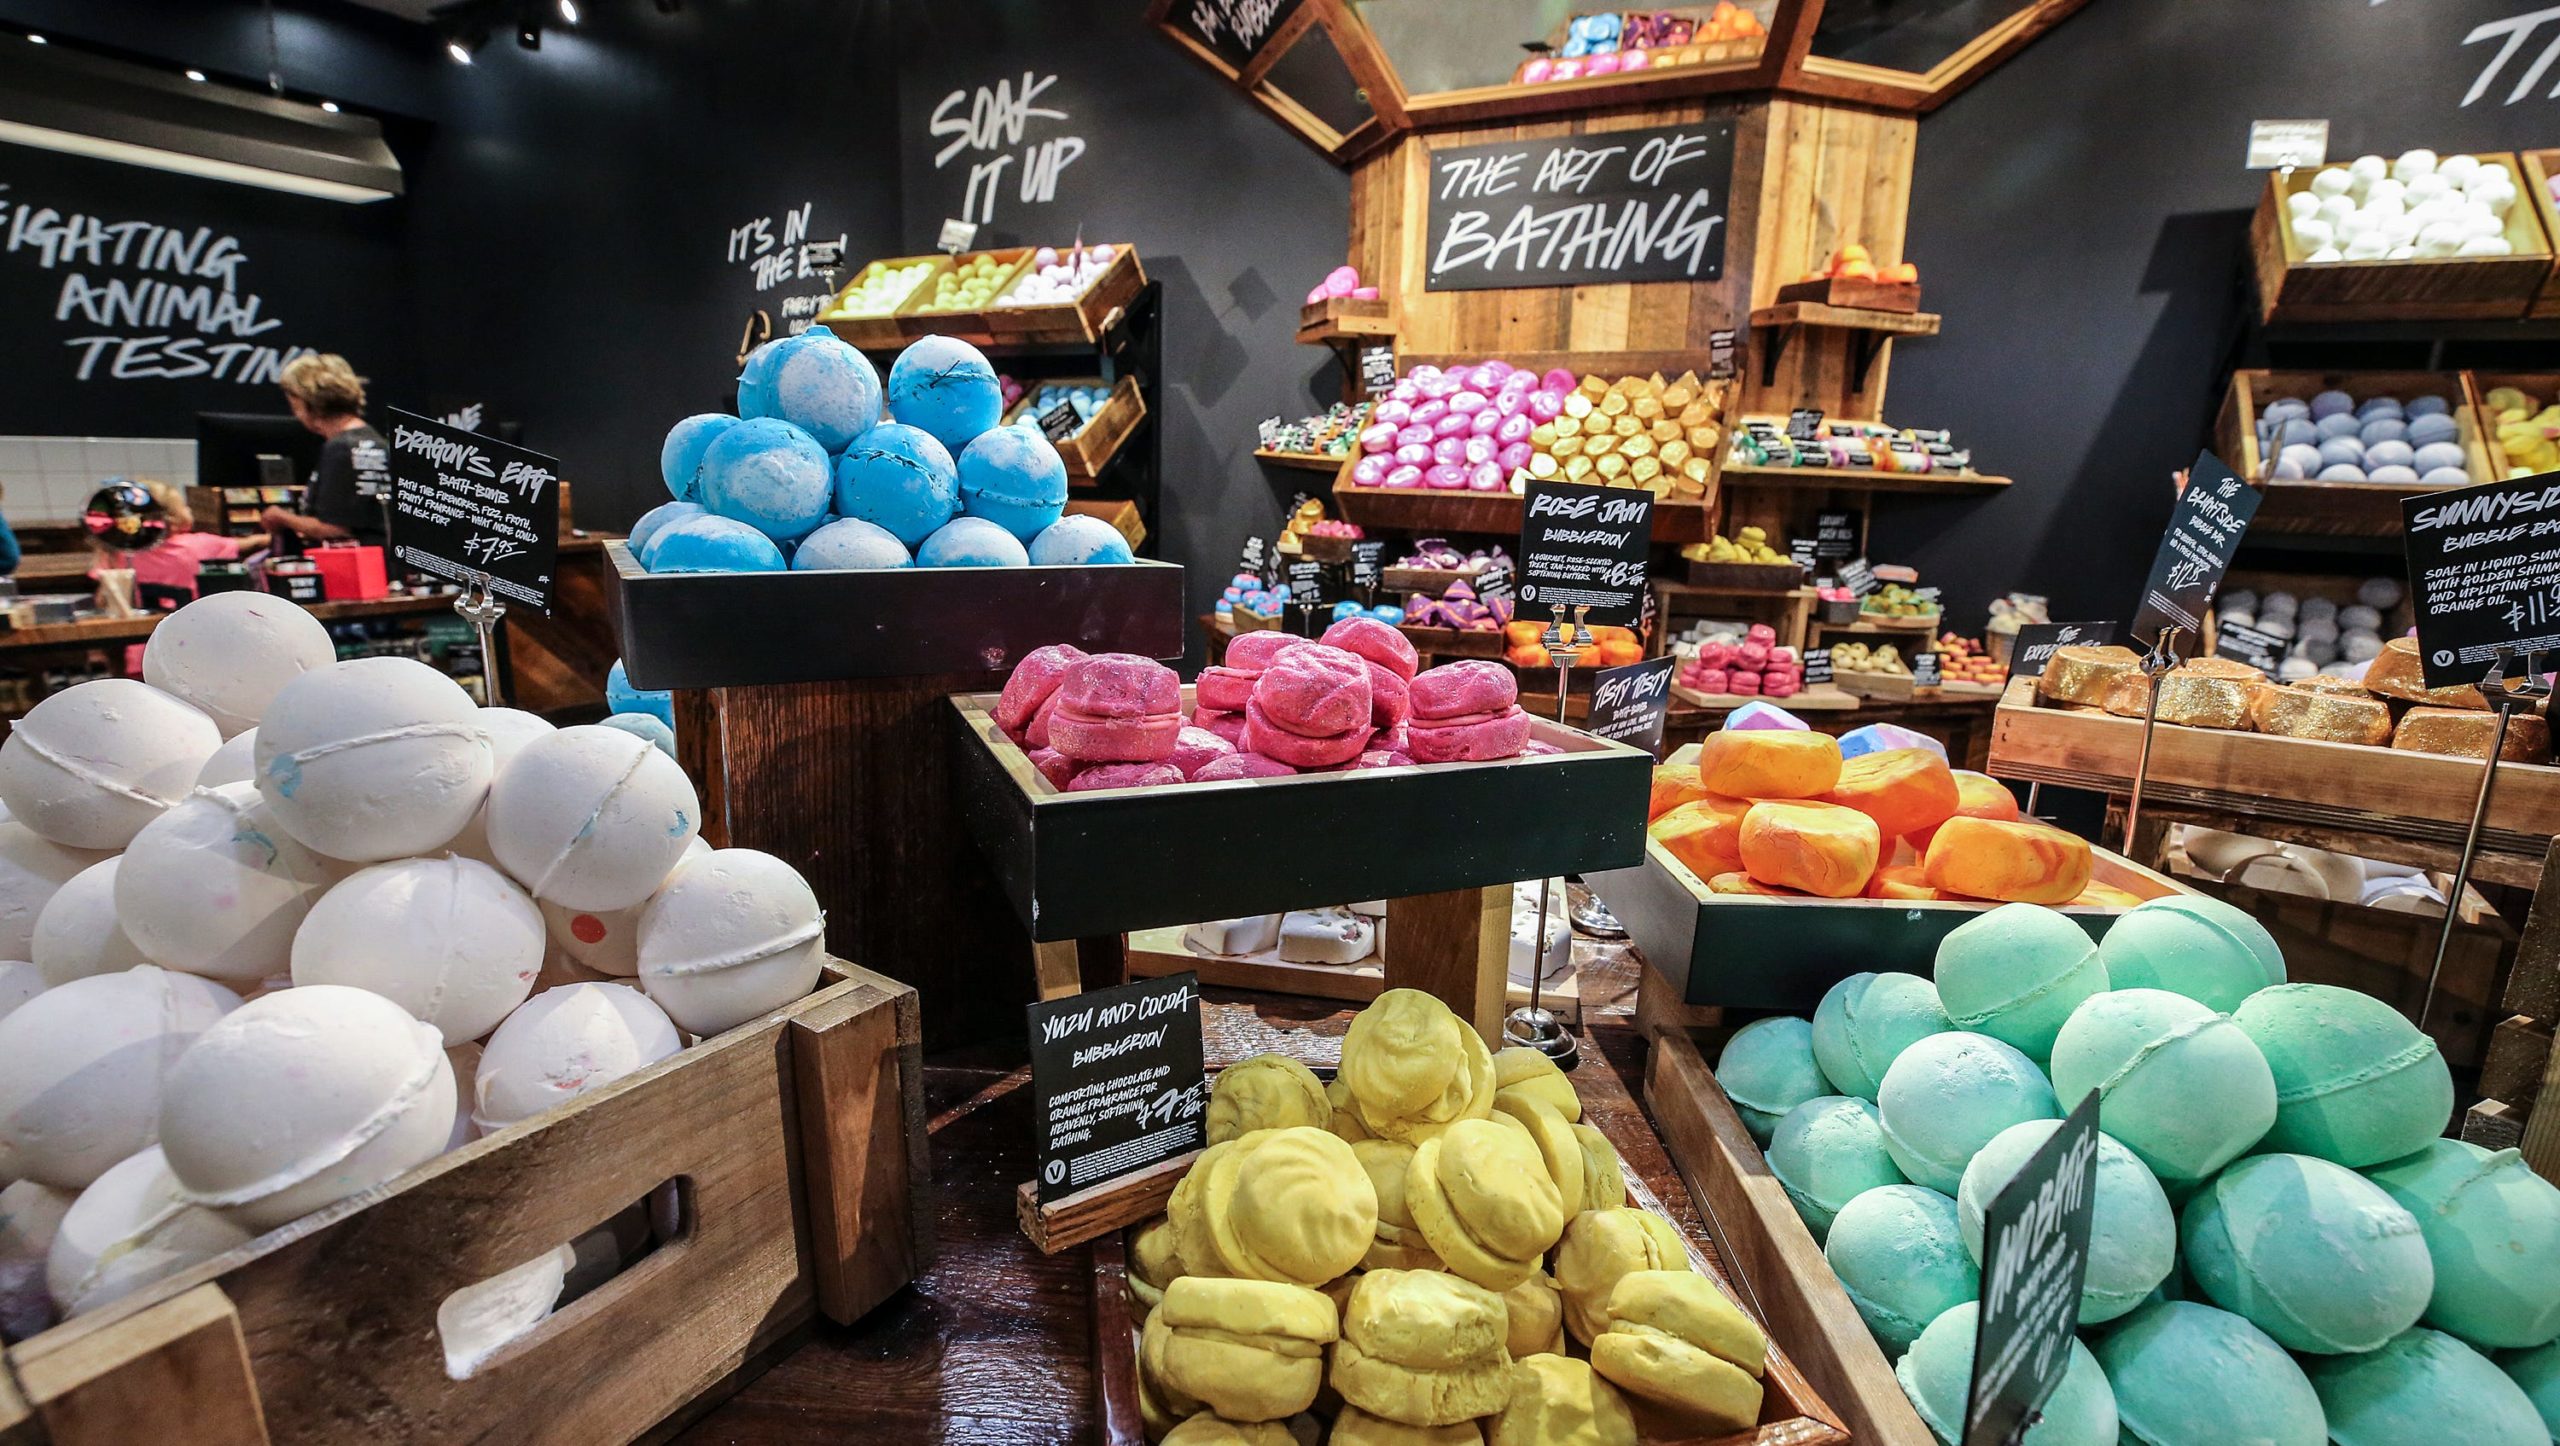 Lush is Deactivating All Accounts to Take a Stand Against Negative Mental Health Challenges from Social Media